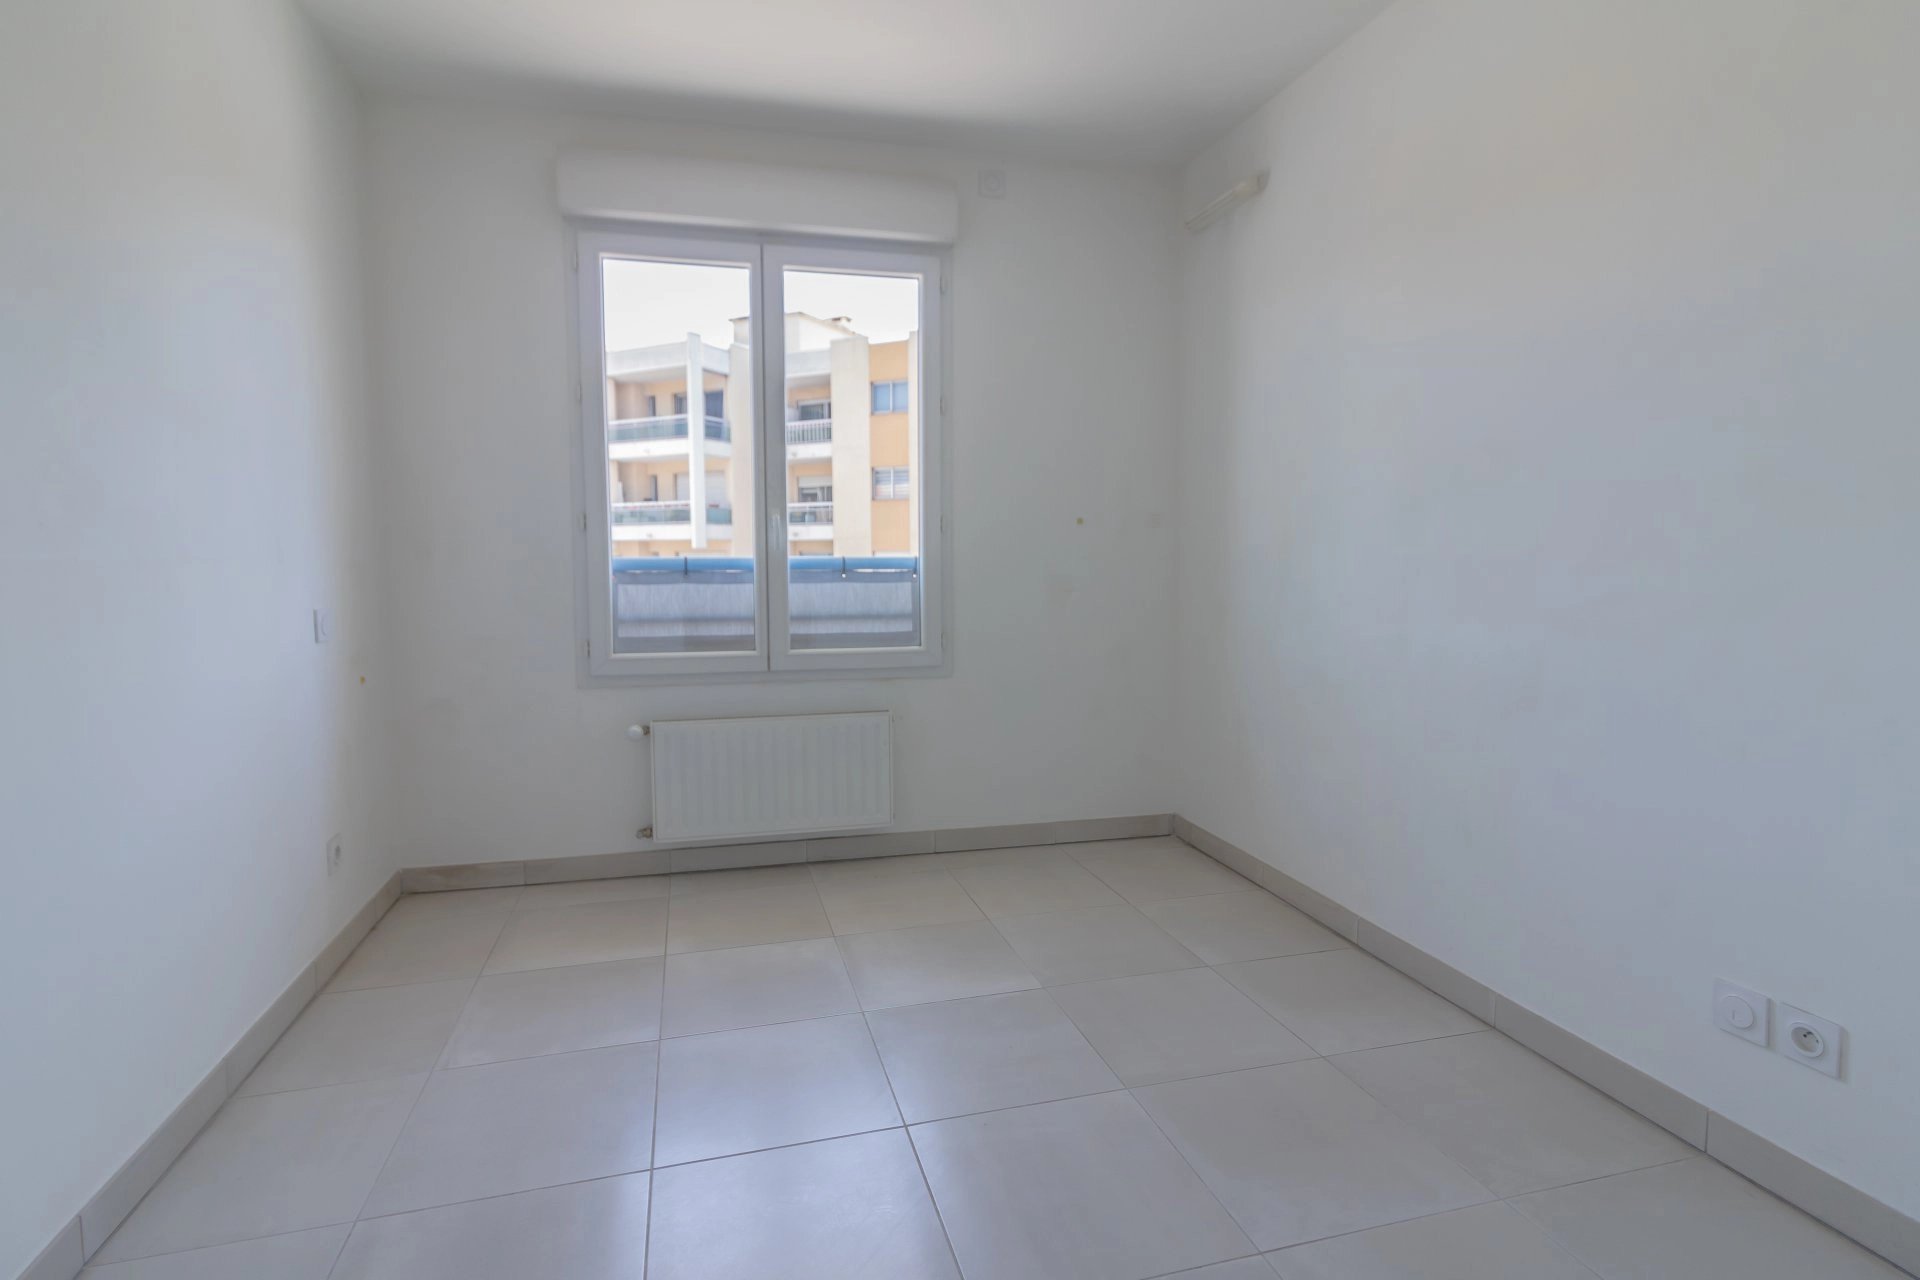 Antibes centre, 2 bedrooms flat with terrace & parking